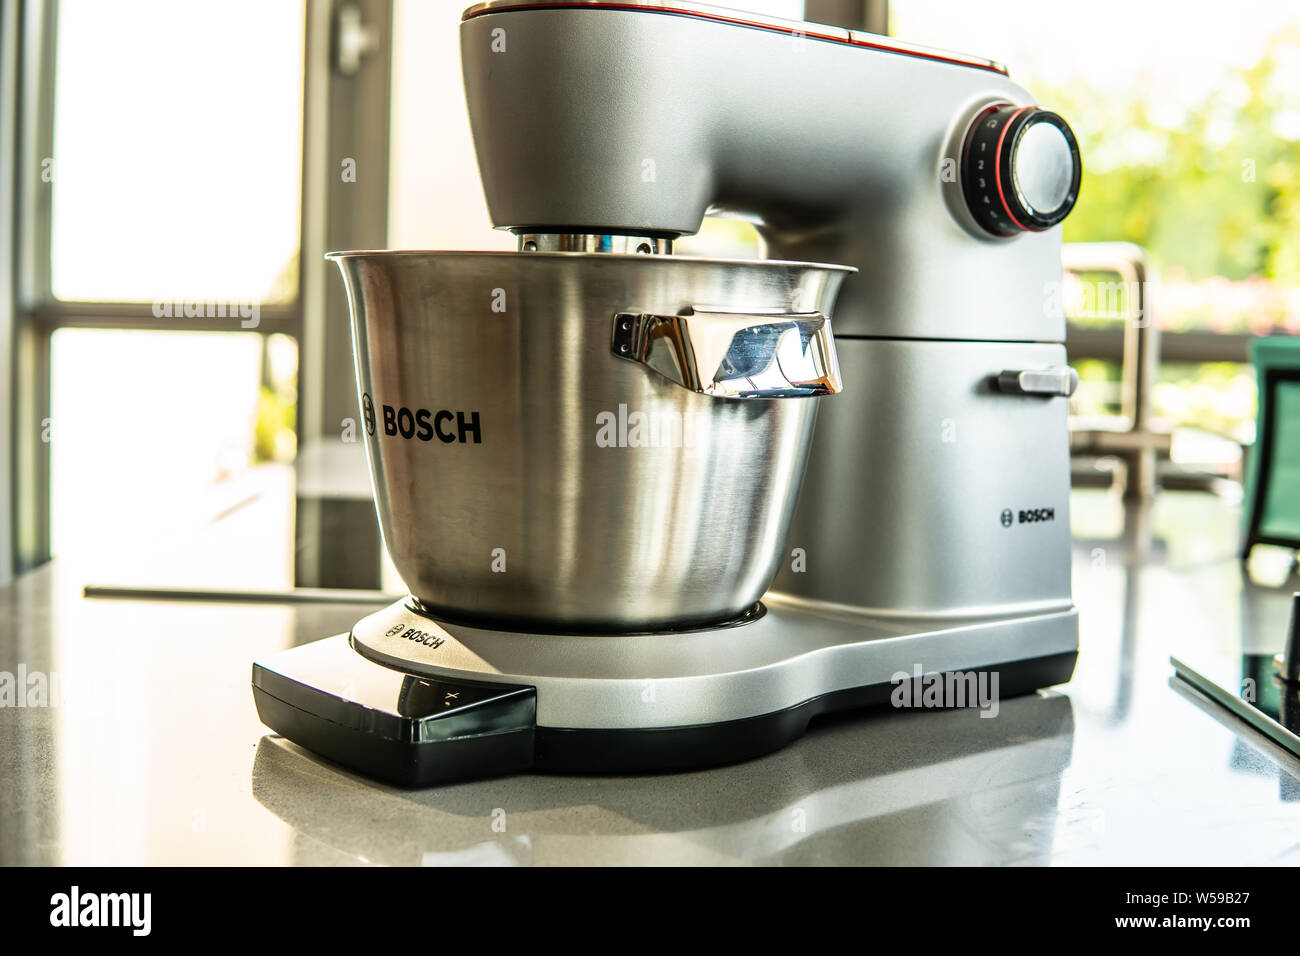 Warsaw, Poland, July 2018 Bosch showroom store, Bosch OptiMUM Food  Processor Kitchen machine on display for sale, perfect cooking experience  Stock Photo - Alamy